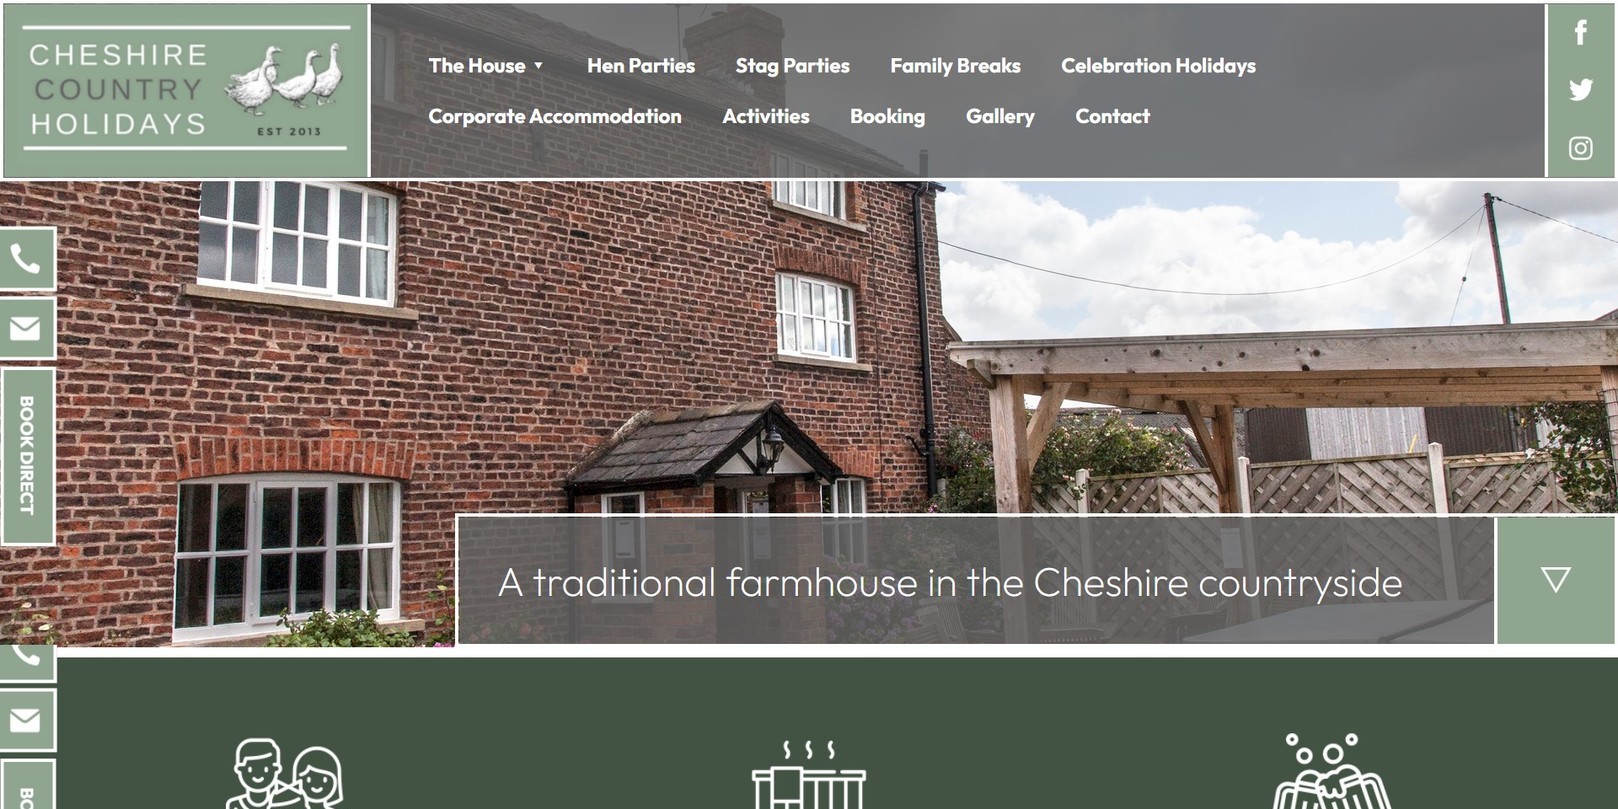 The new Cheshire Country Holidays website, designed by it'seeze, website shown on desktop